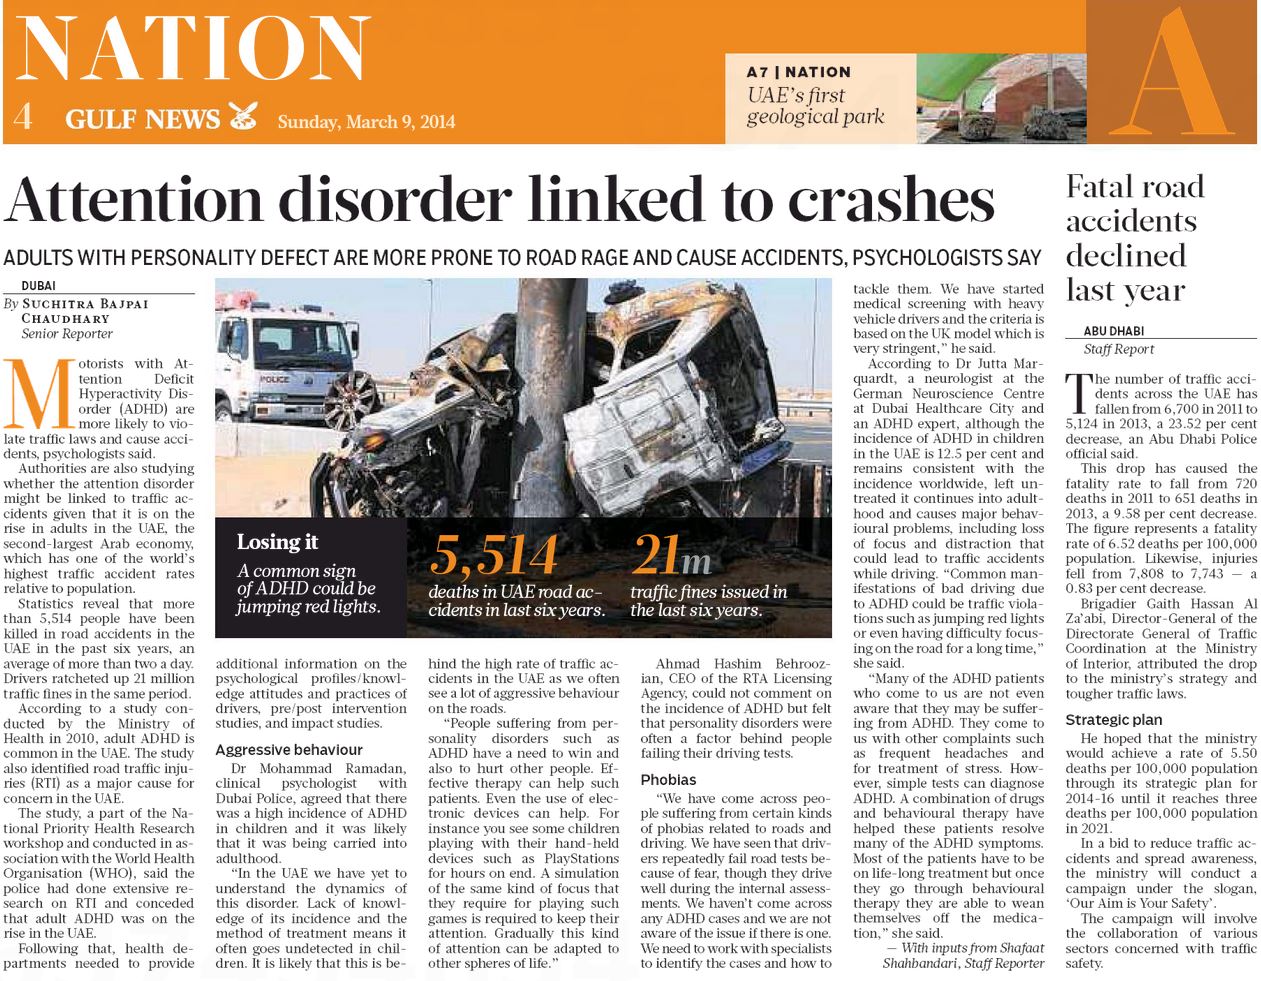 Gulf News: Attention disorder linked to crashes